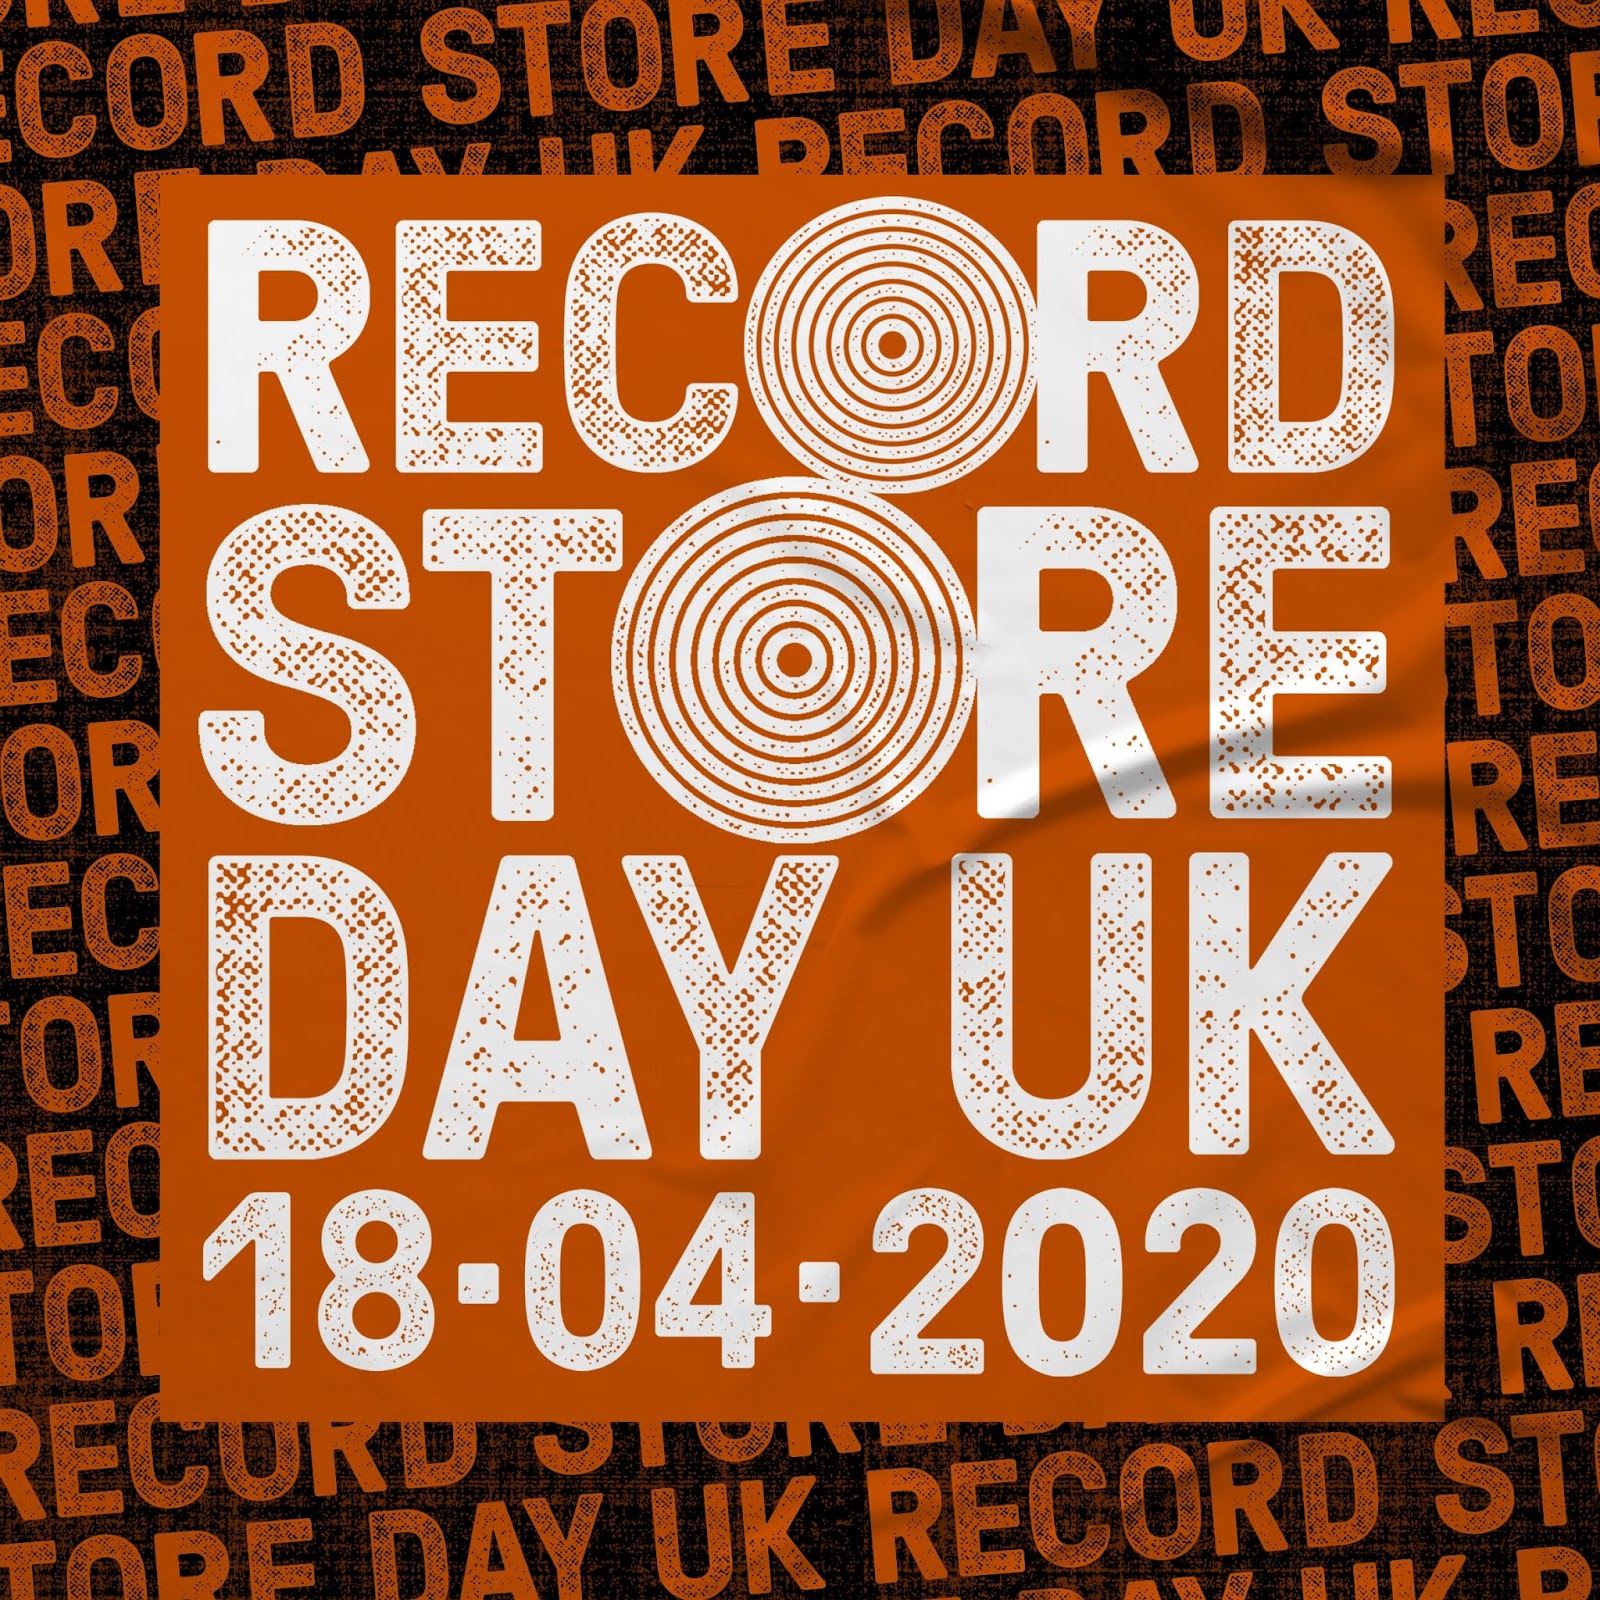 Vod Music News Record Store Day Announcement